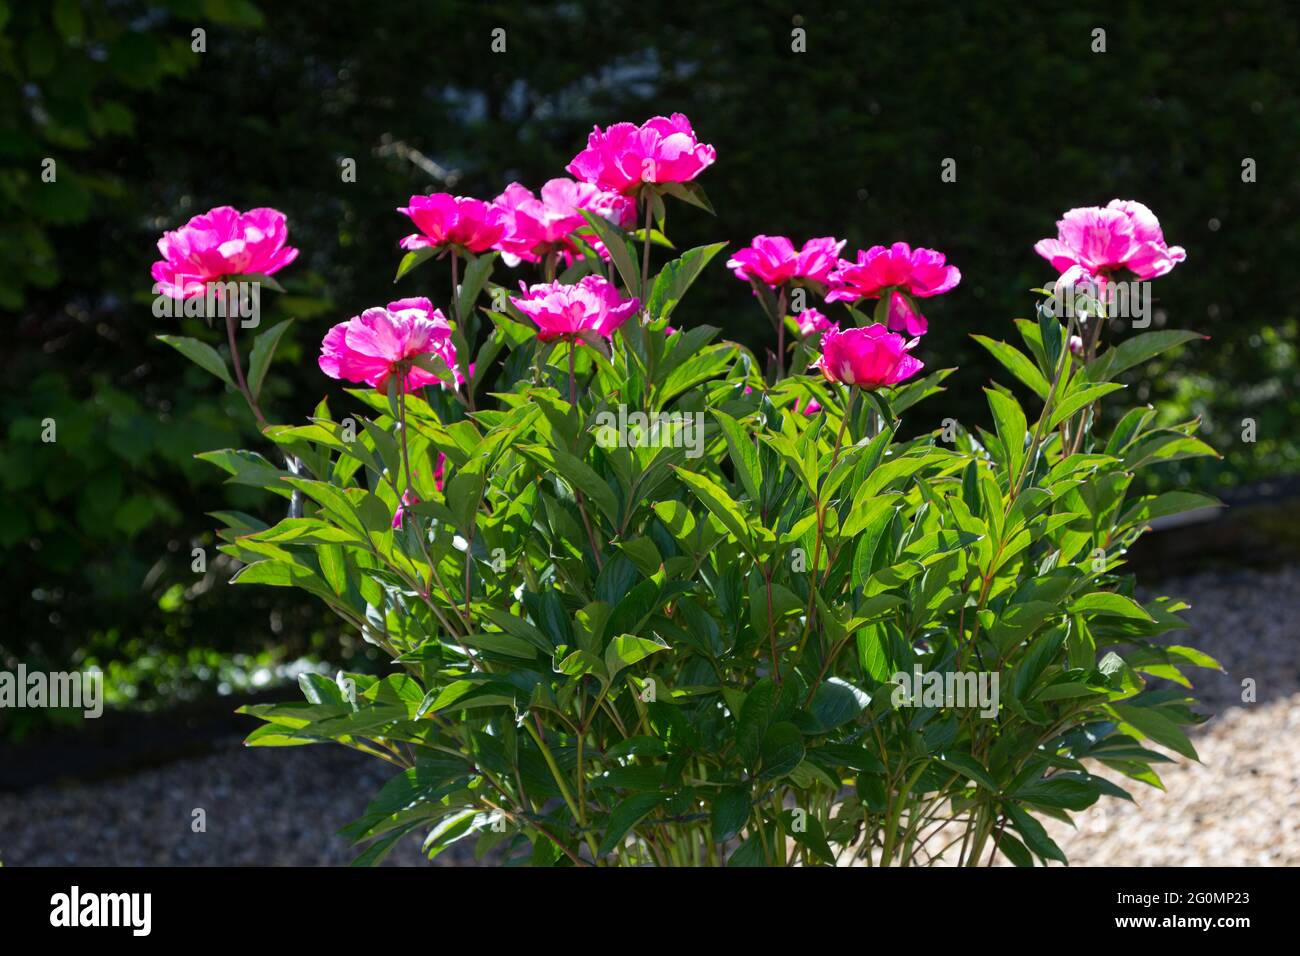 A red Peony plant growing in a pot in full flower. Stock Photo